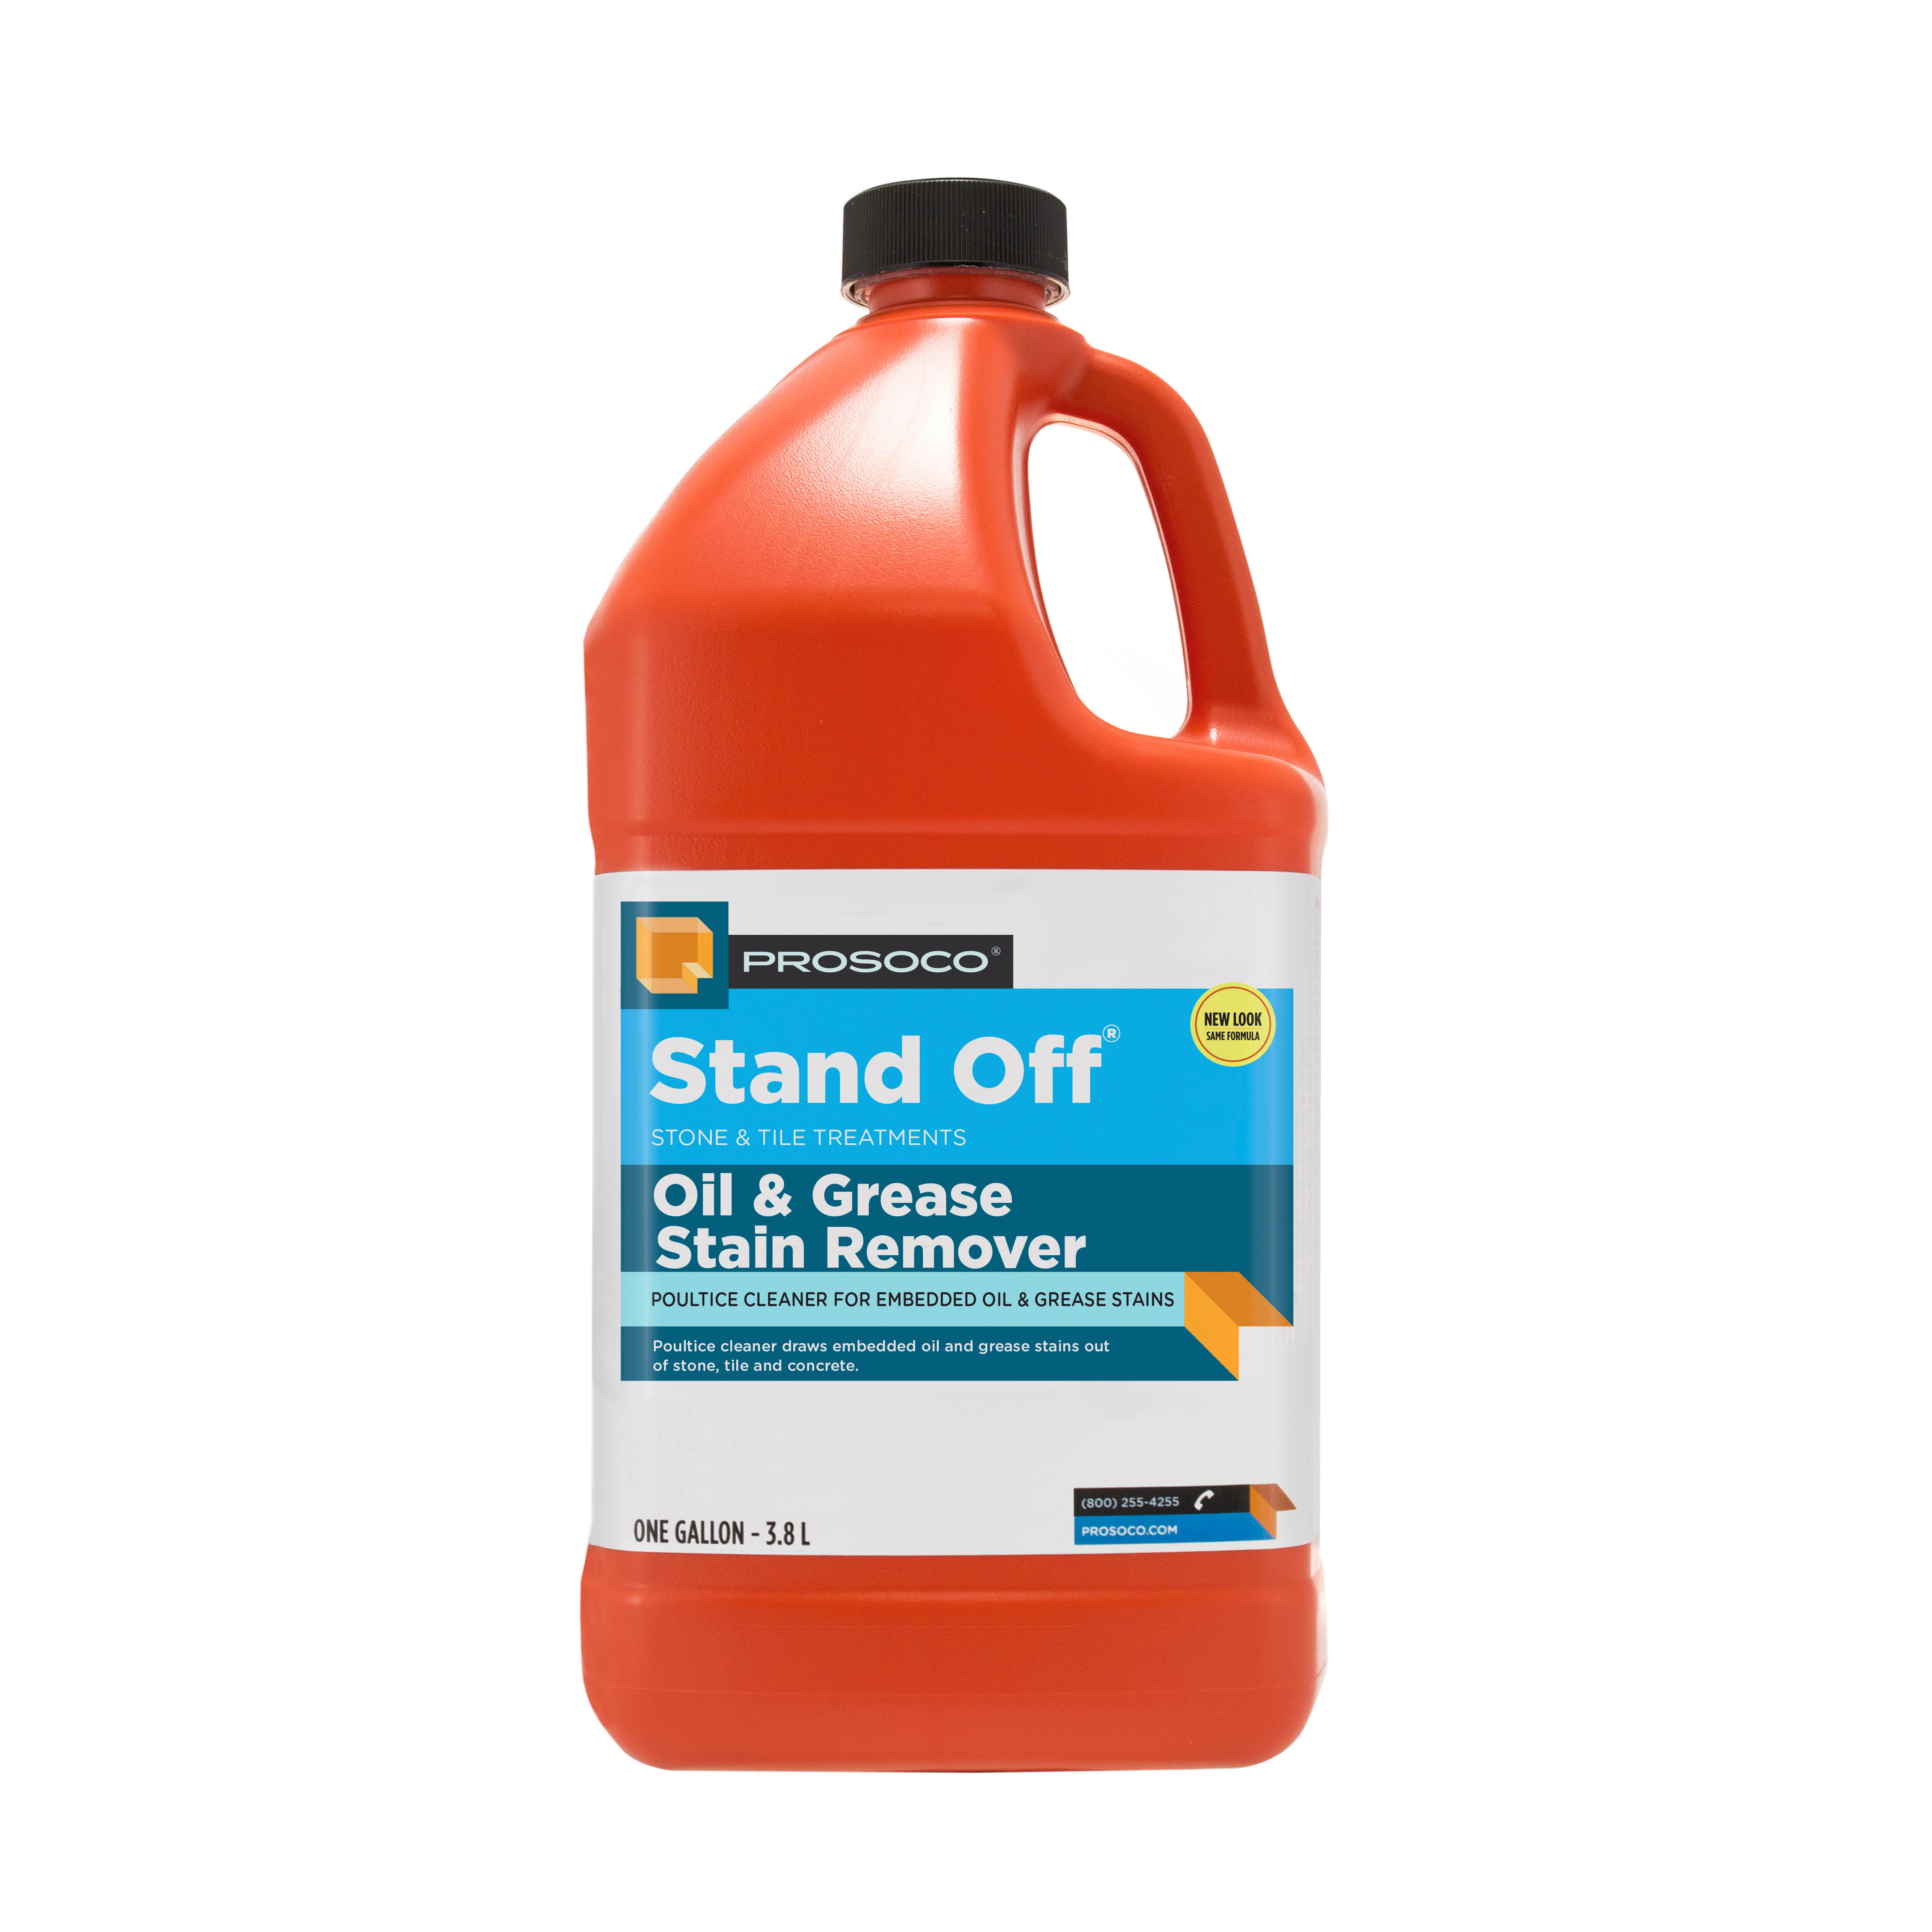 Prosoco Stand Off® Oil and Grease Stain Remover, 1-gal.